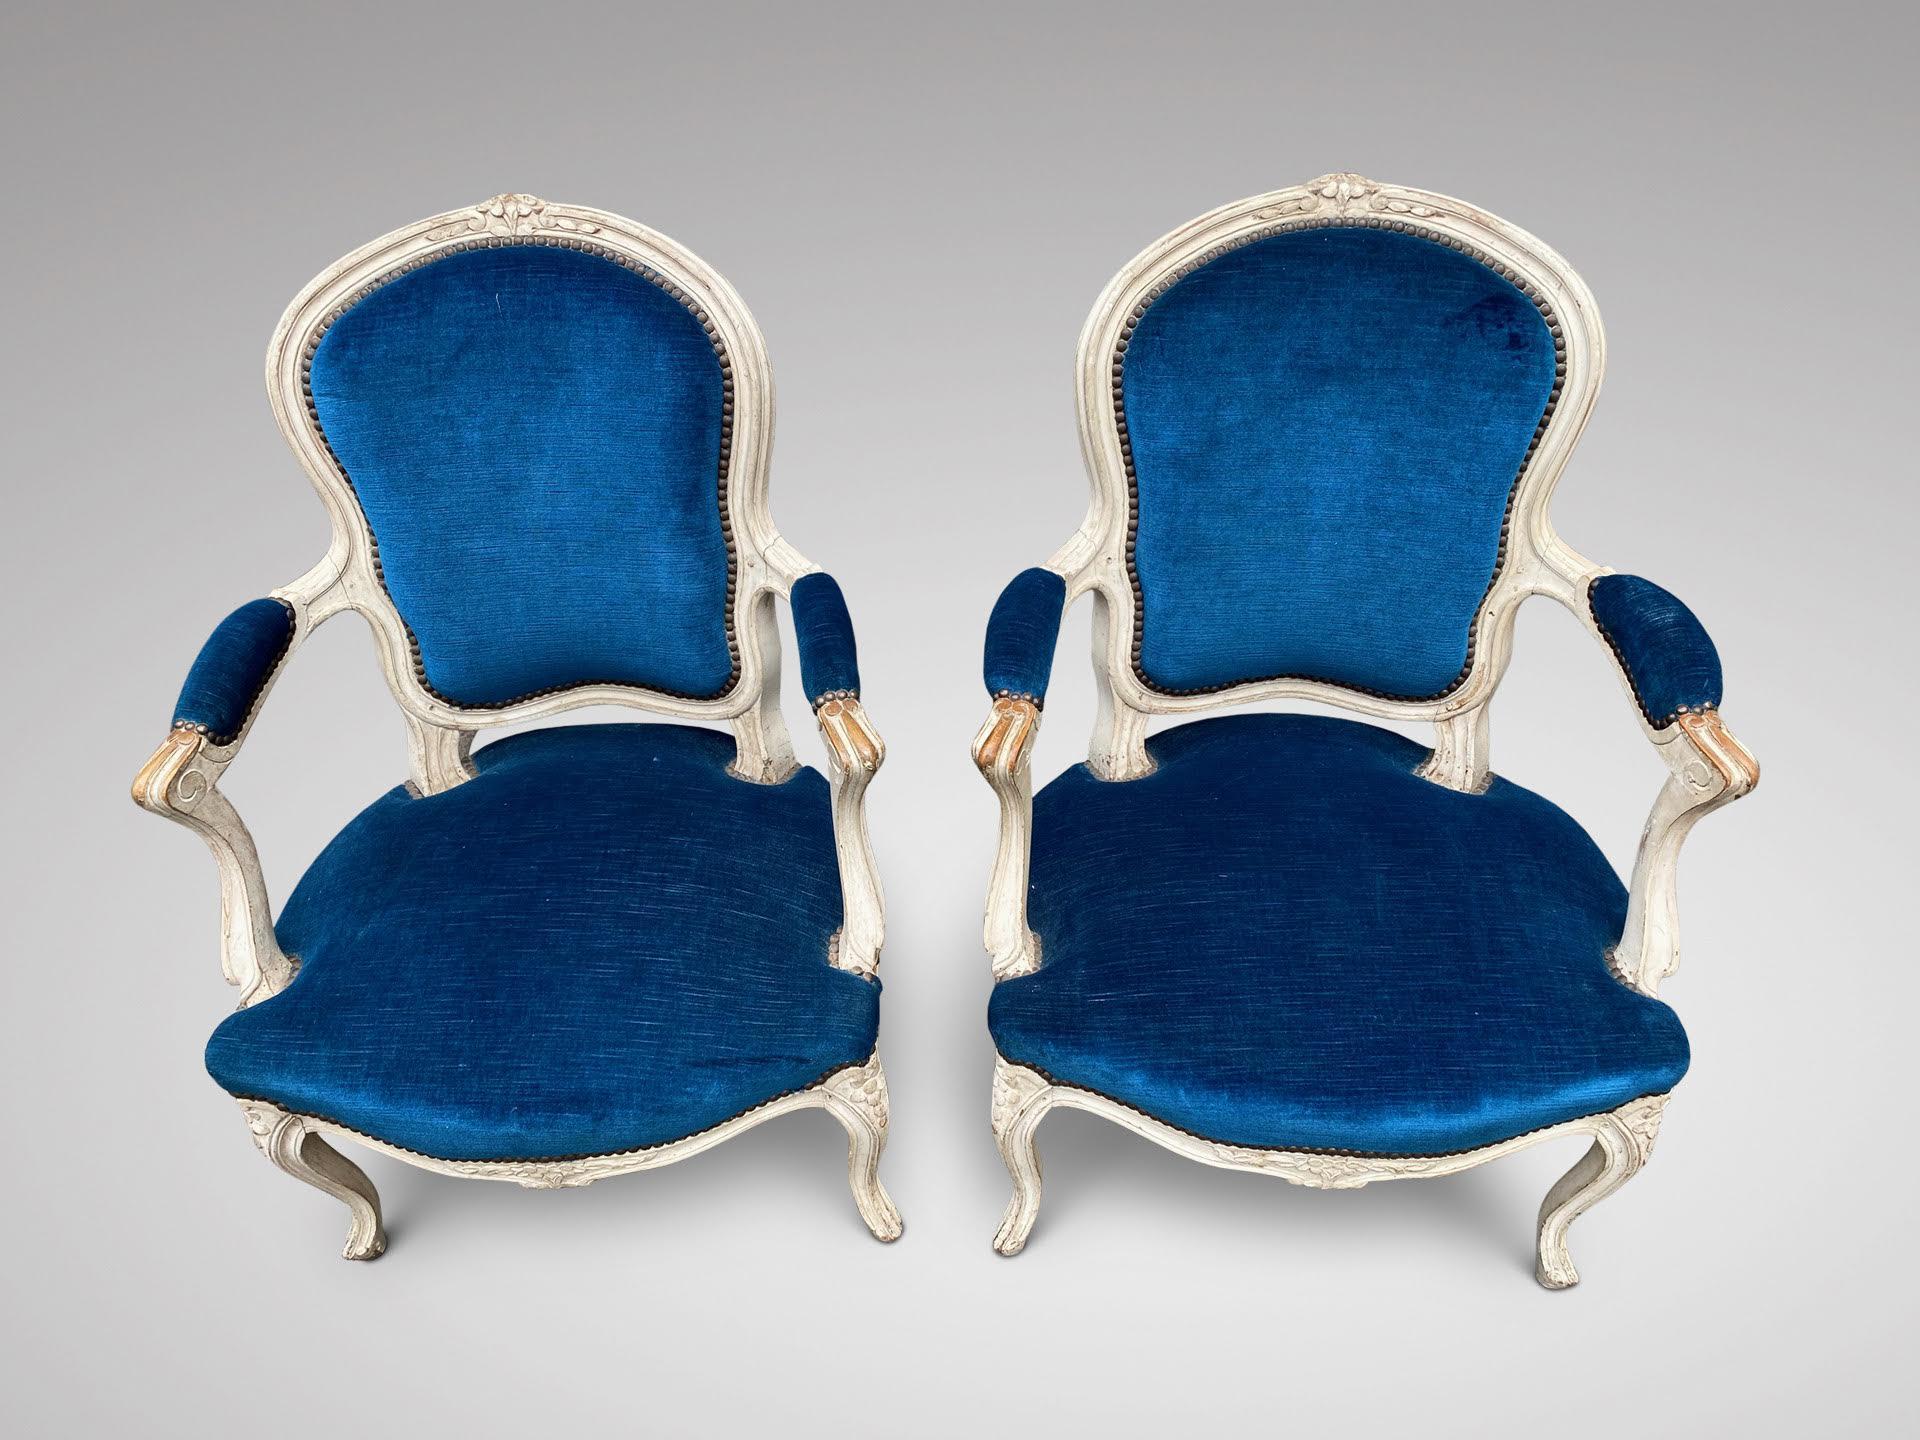 Hand-Painted Pair of 19th Century French Bergères Armchairs